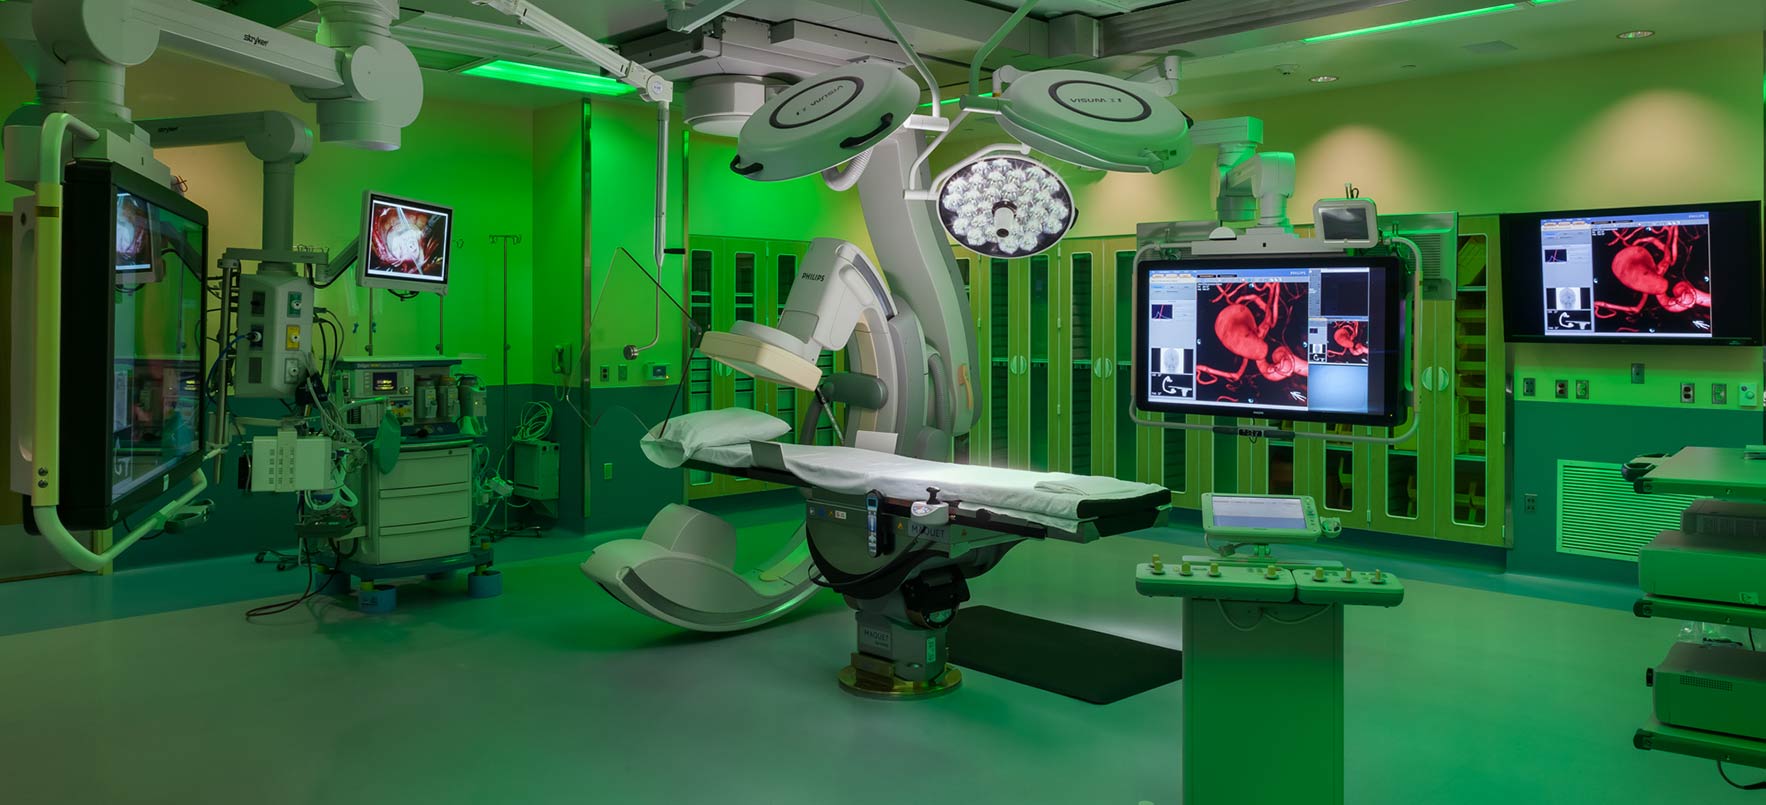 Hybrid operating room with green lighting